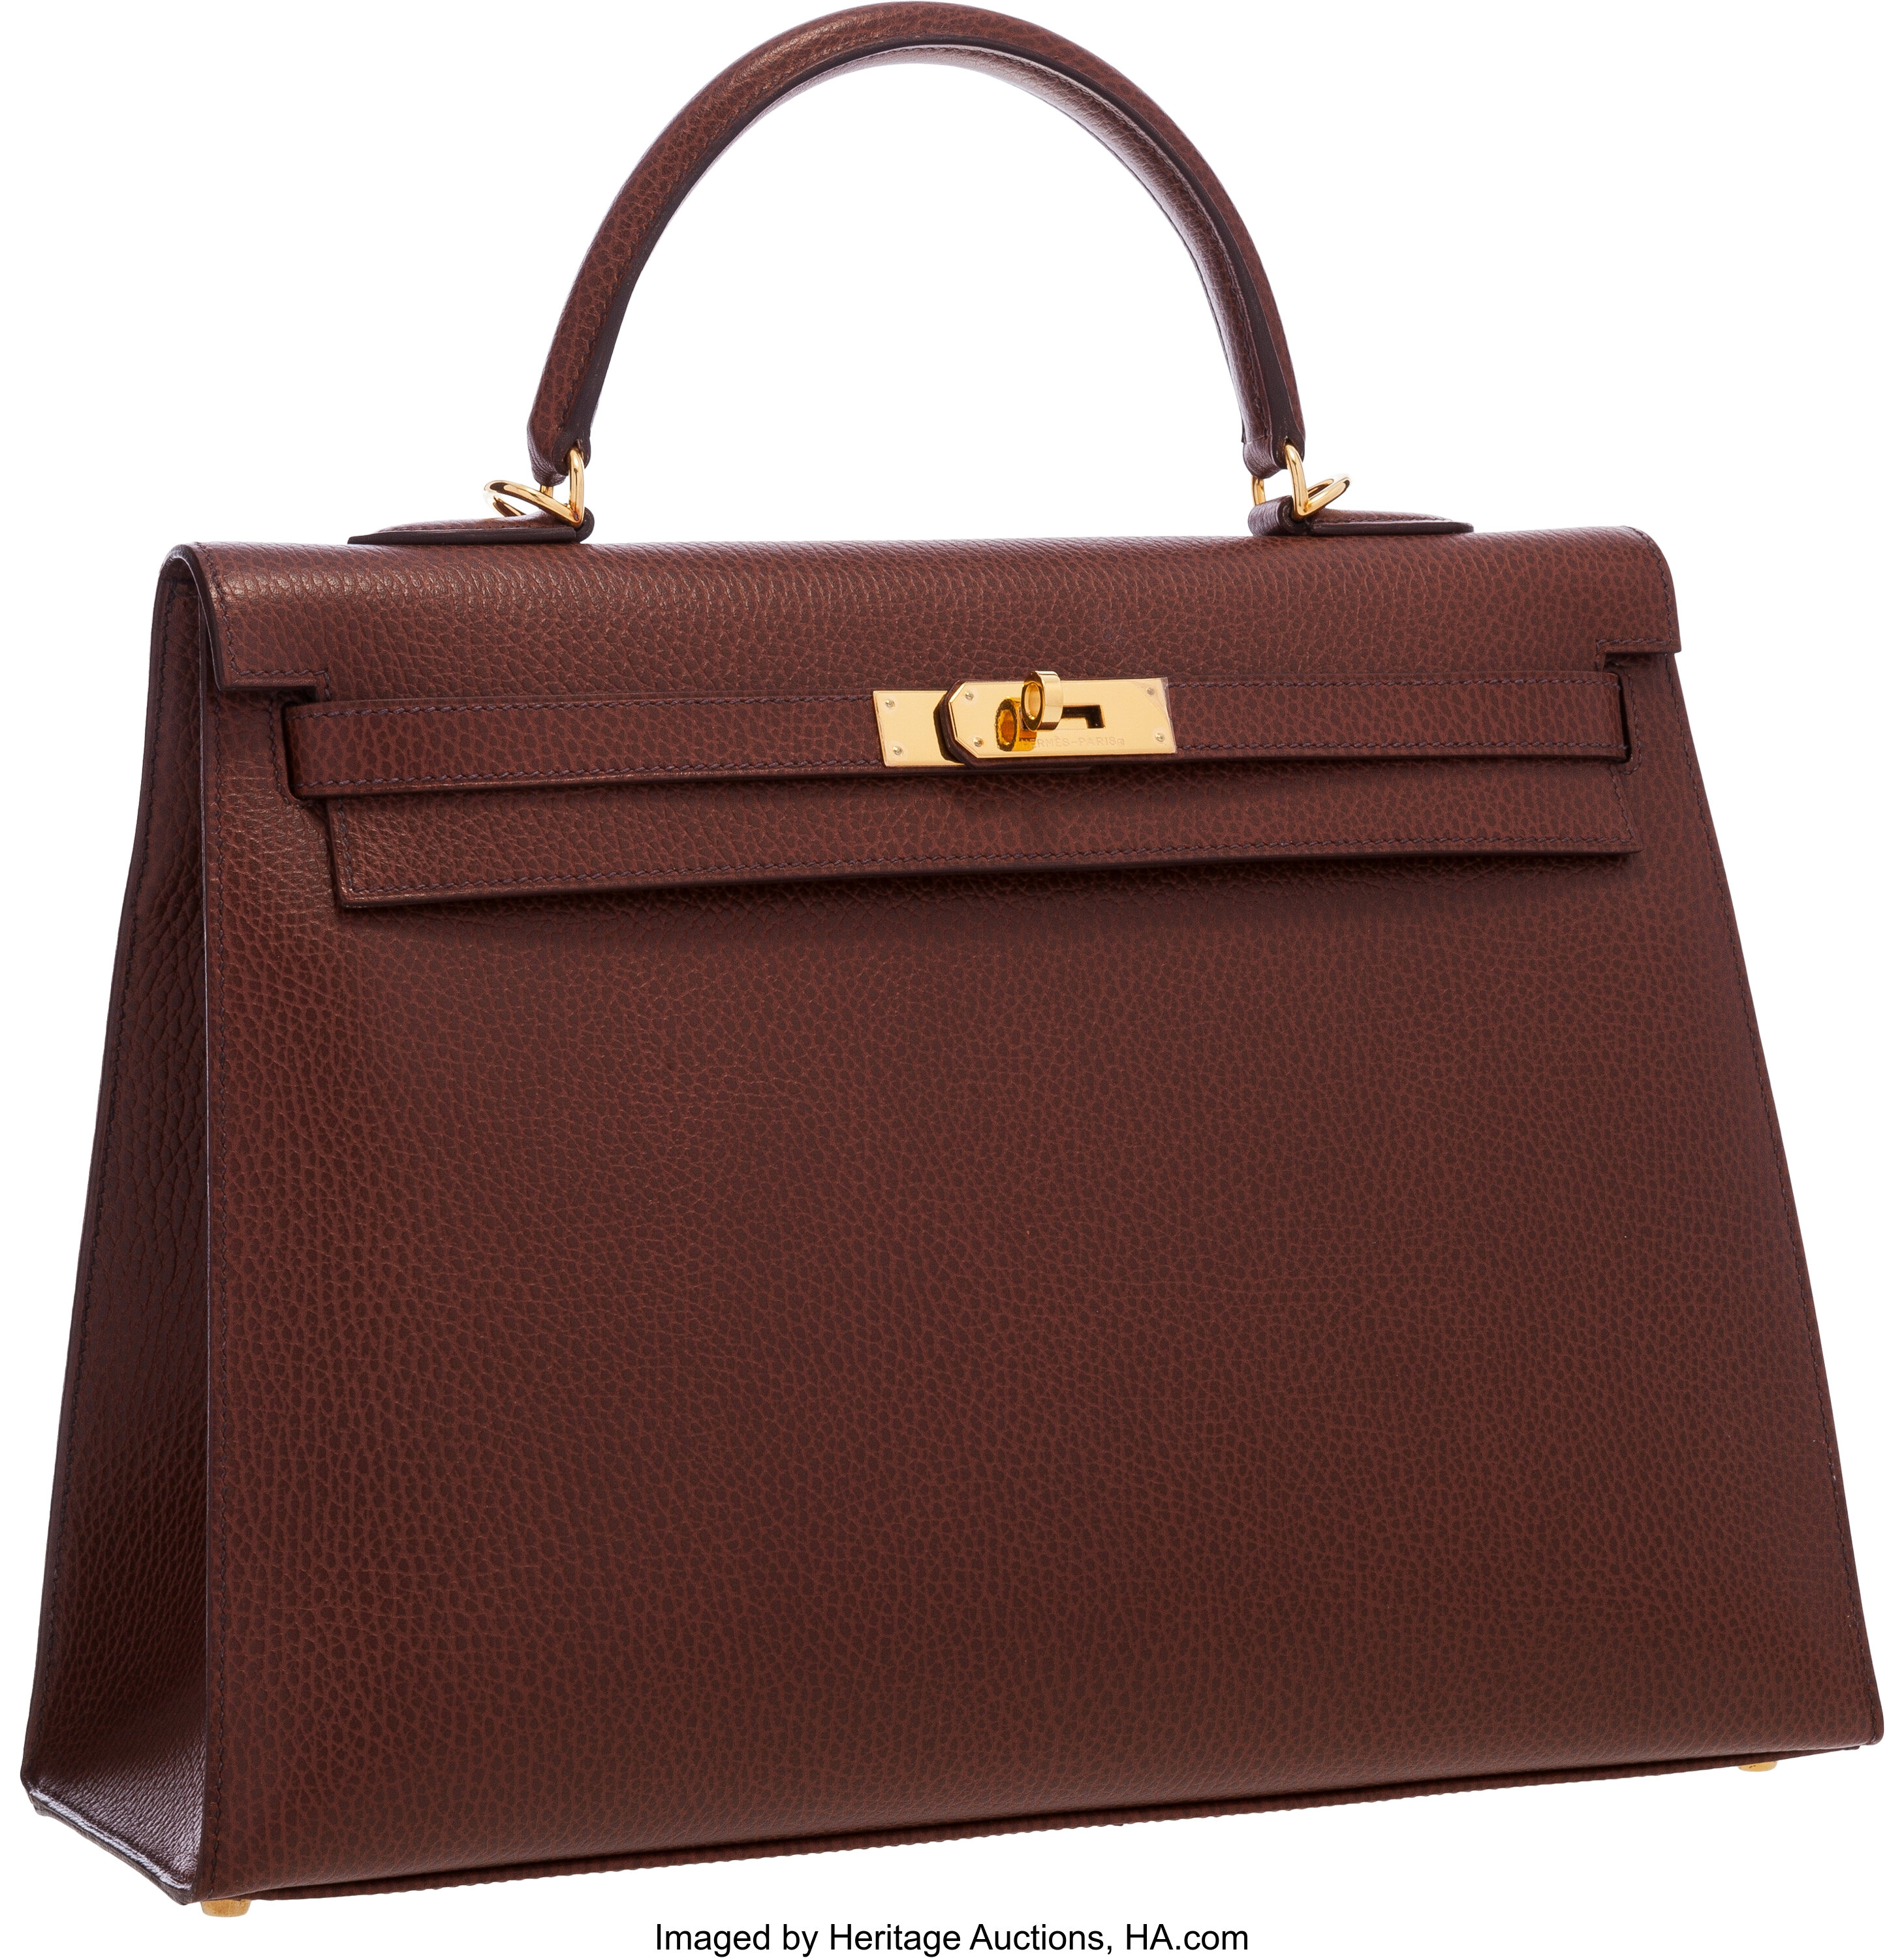 Hermes 35cm Havane Ardennes Leather Sellier Kelly Bag with Gold | Lot ...